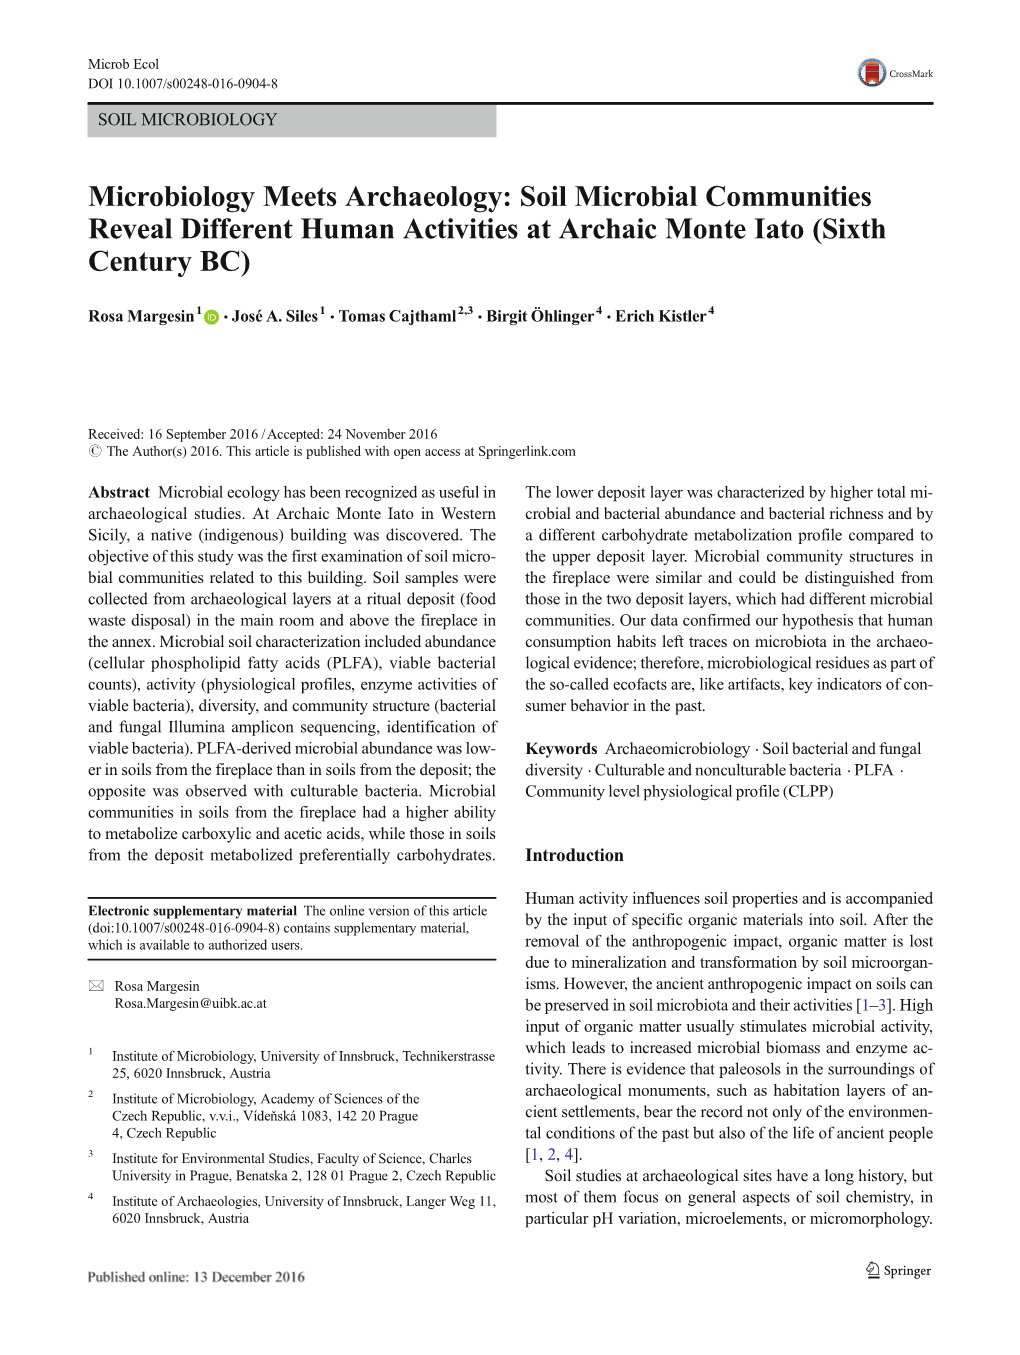 Soil Microbial Communities Reveal Different Human Activities at Archaic Monte Iato (Sixth Century BC)